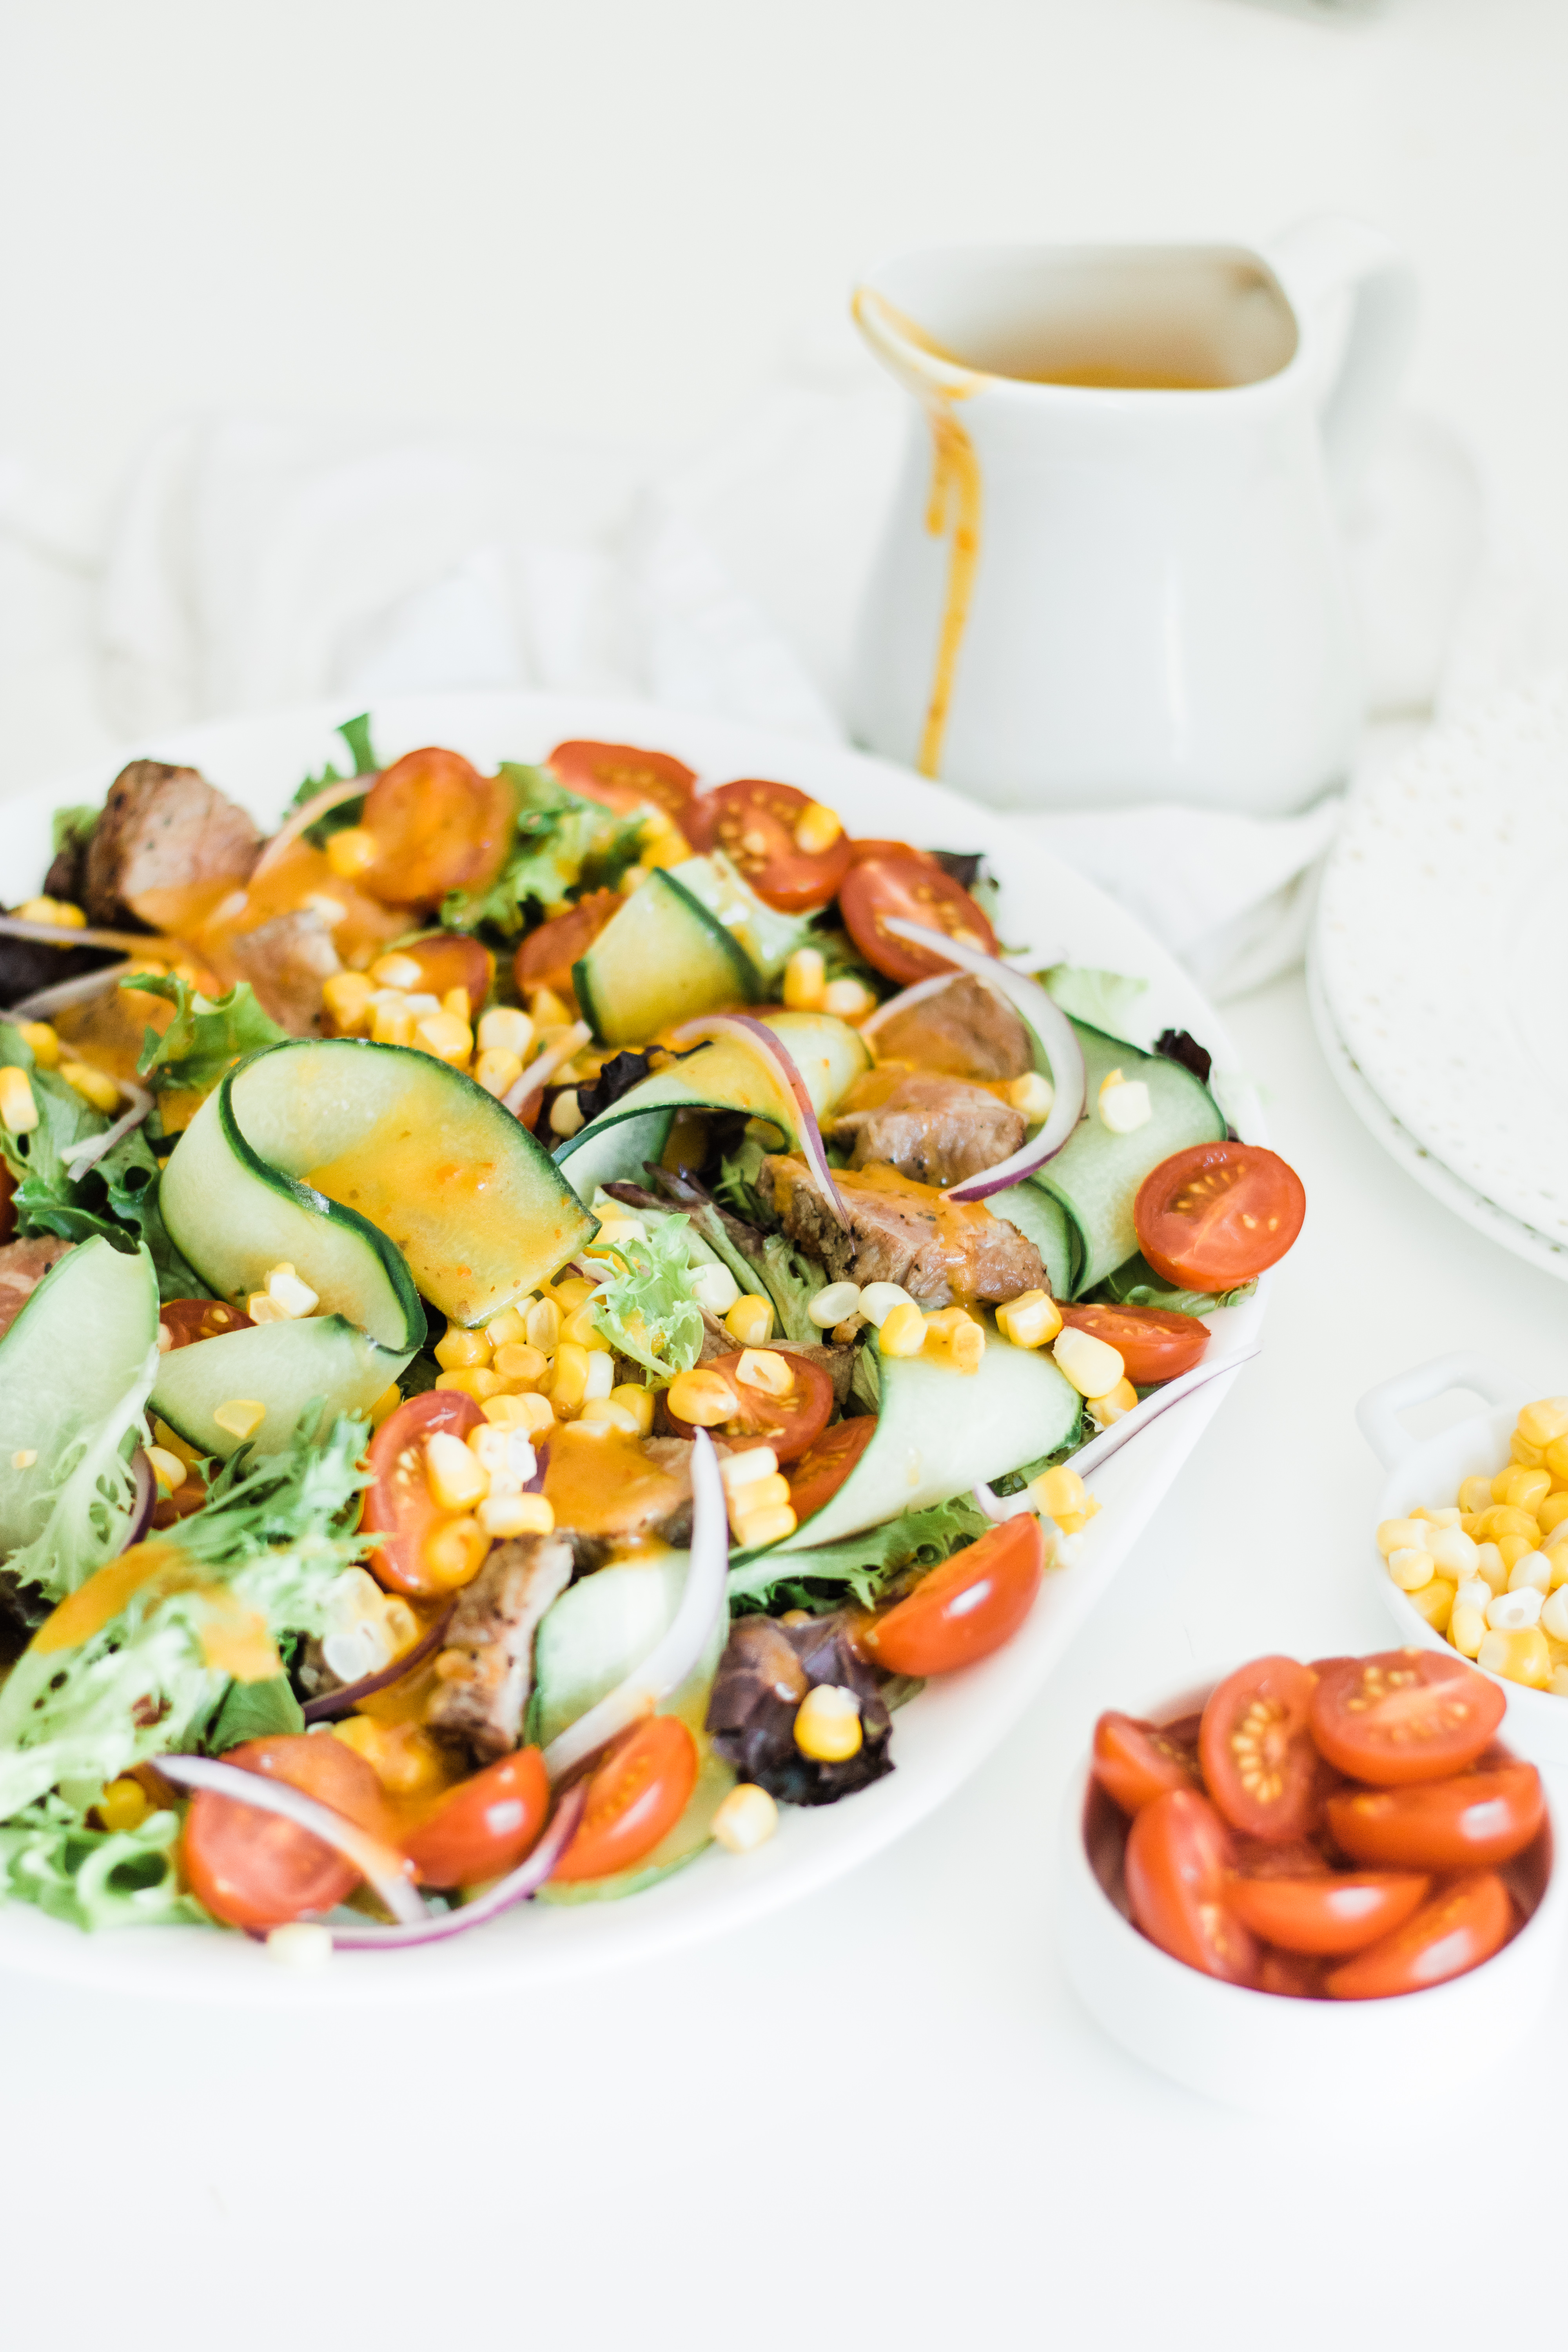 Steak Salad with Chipotle Lime Dressing